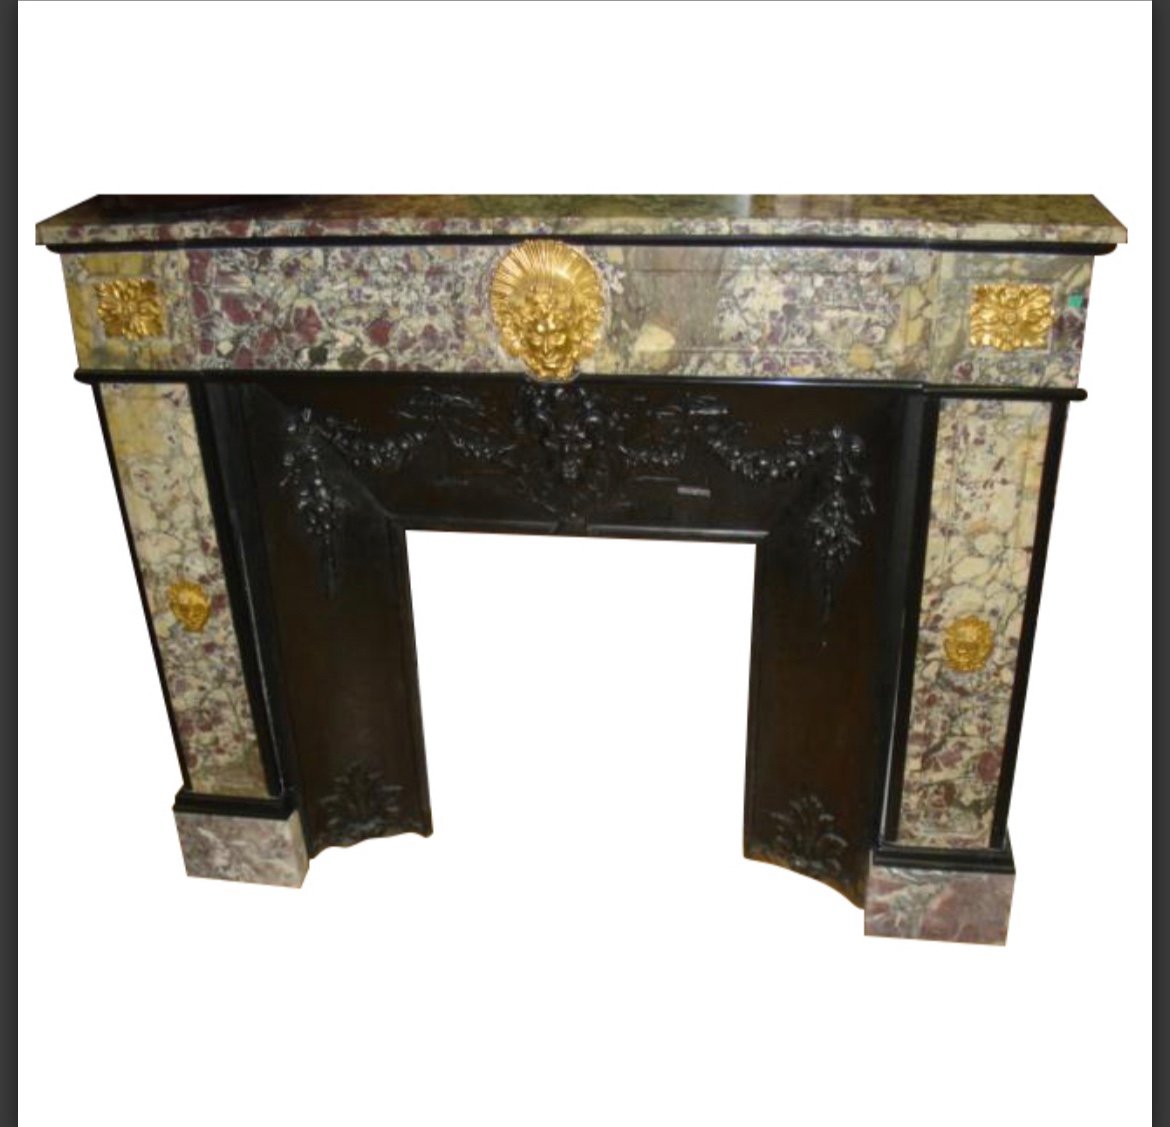 Exceptional Louis XVI Style Bronze Peach Blossom Marble Fireplace